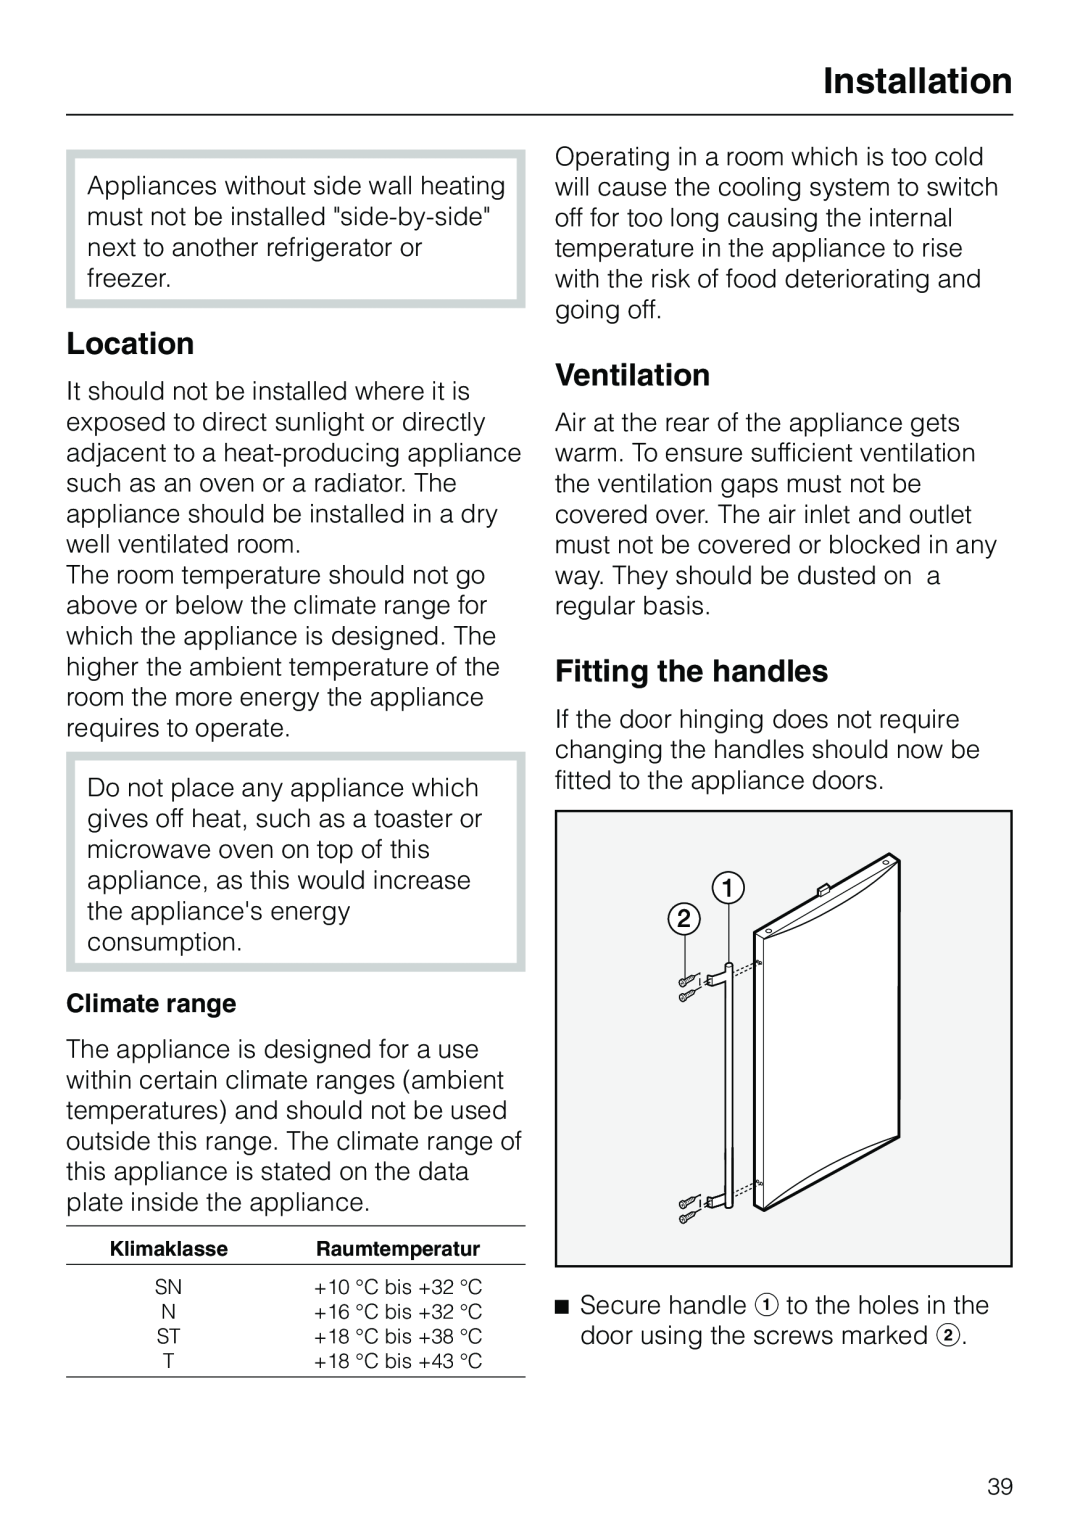 Miele KF 7540 SN installation instructions Installation, Location, Ventilation, Fitting the handles, Climate range 